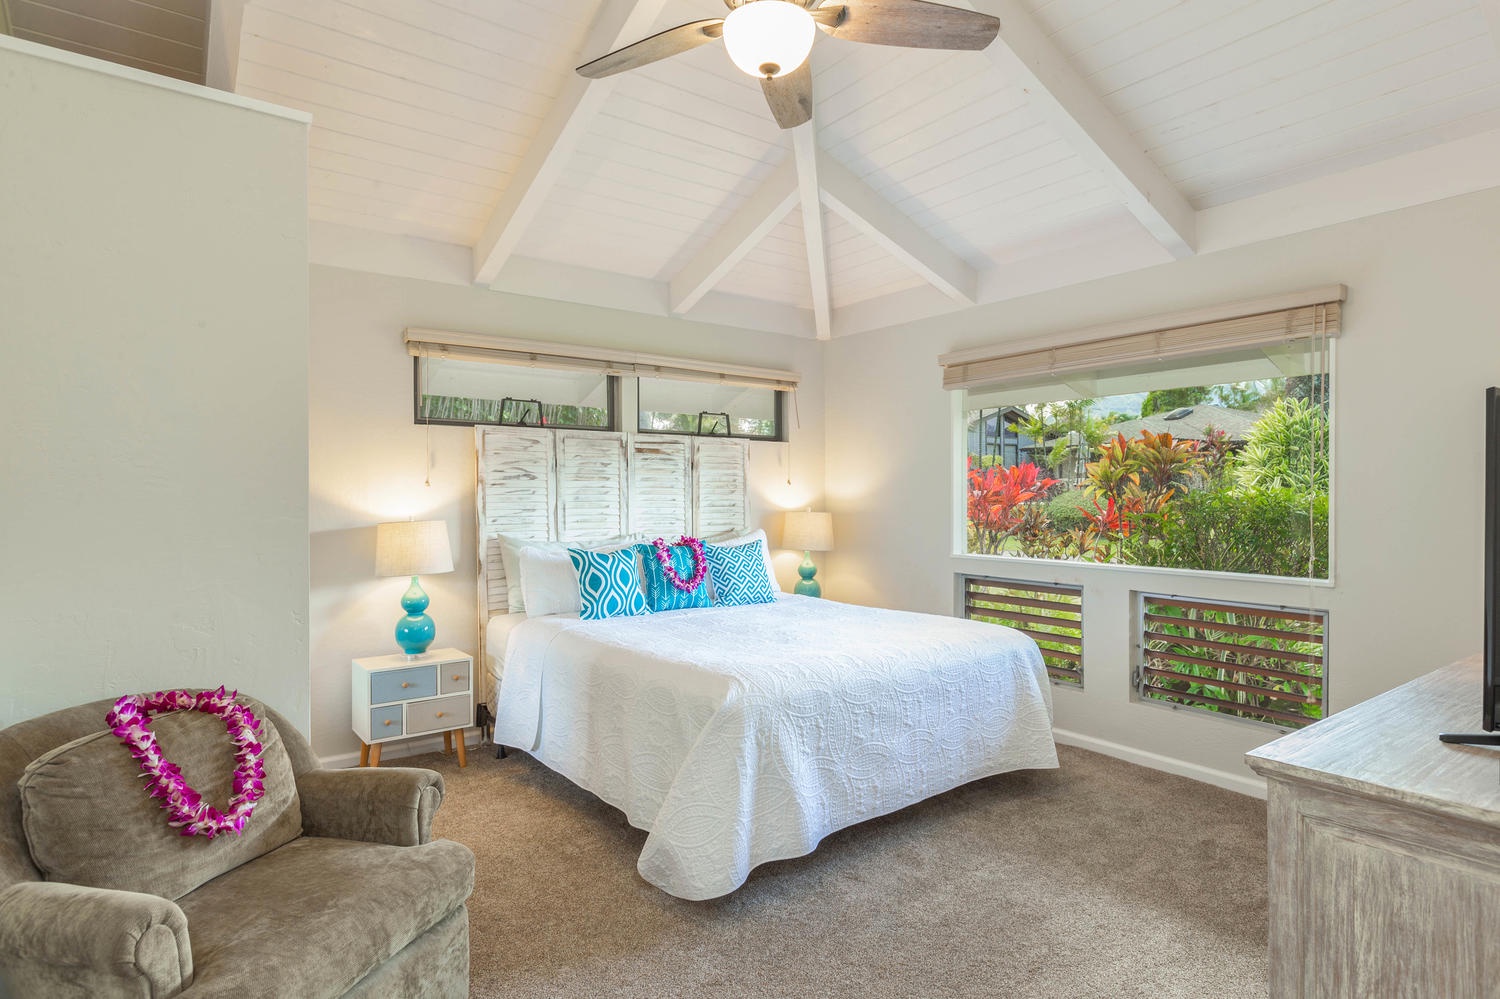 Princeville Vacation Rentals, Mala Hale - Lovely guest bedroom with a king-size bed